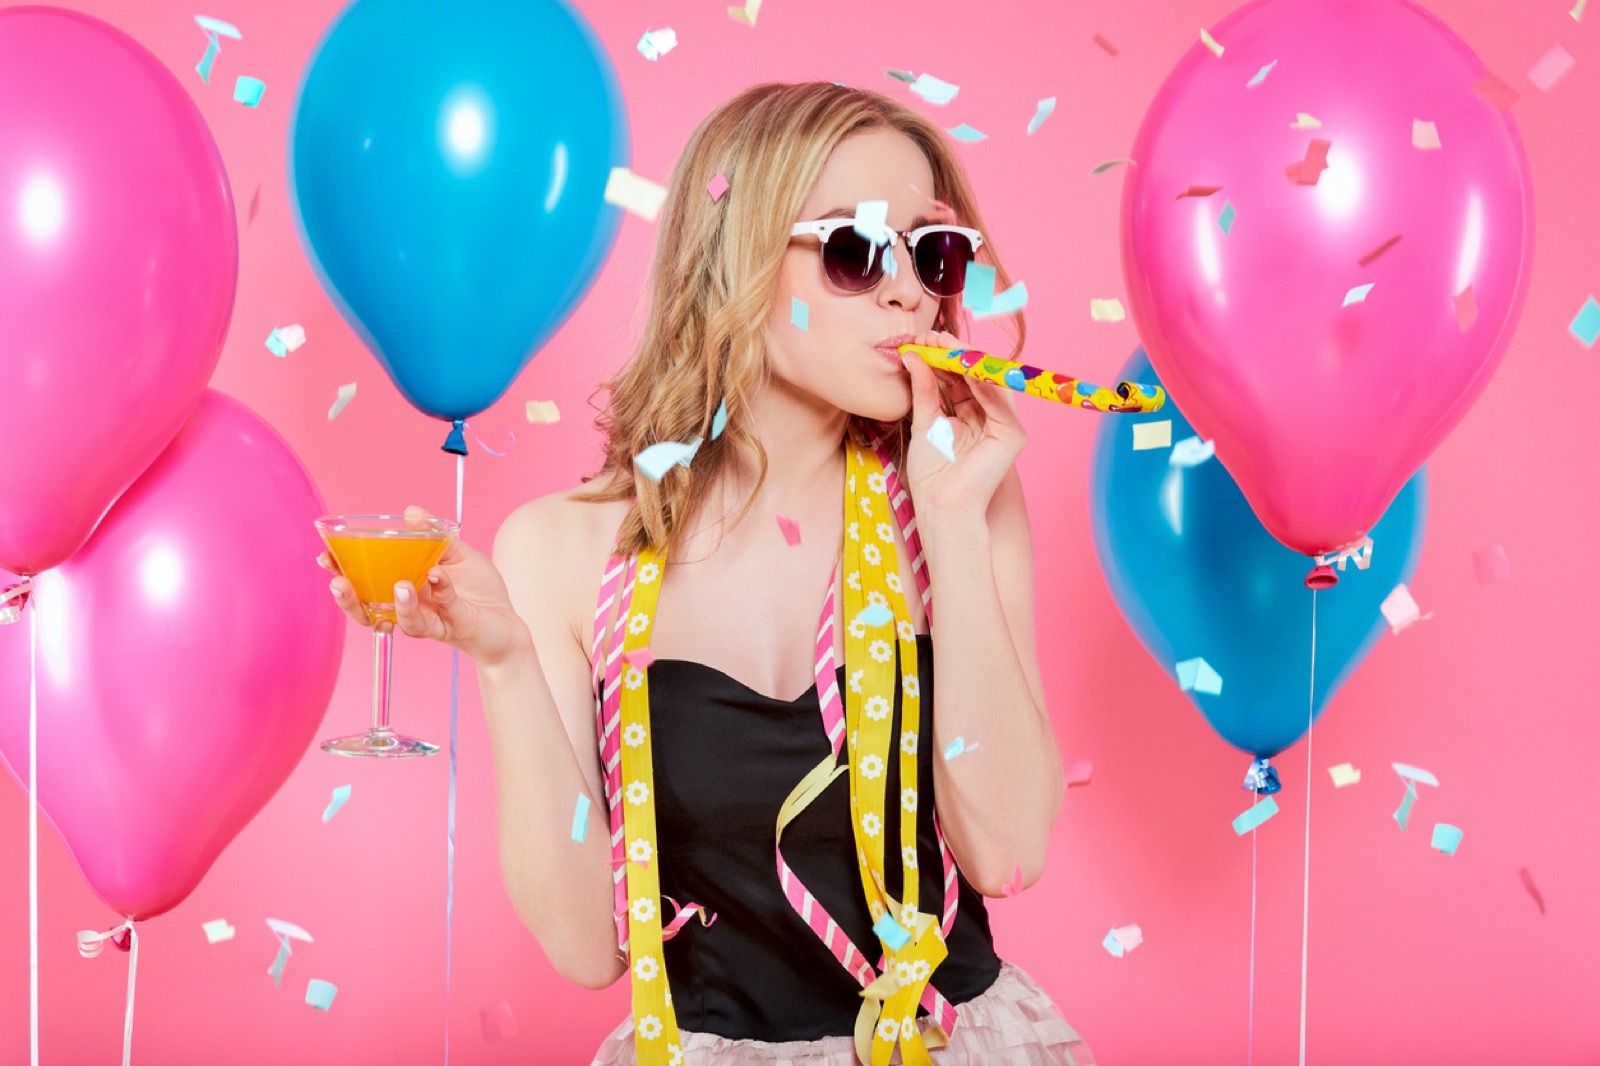 😠 What % Antisocial Are You? Gorgeous Trendy Young Woman In Party Outfit Celebrating Birthday. Party Mood, Balloons, Noisemaker, Flying Confetti, Cocktail And Dancing Concept On Pastel Pink Background.